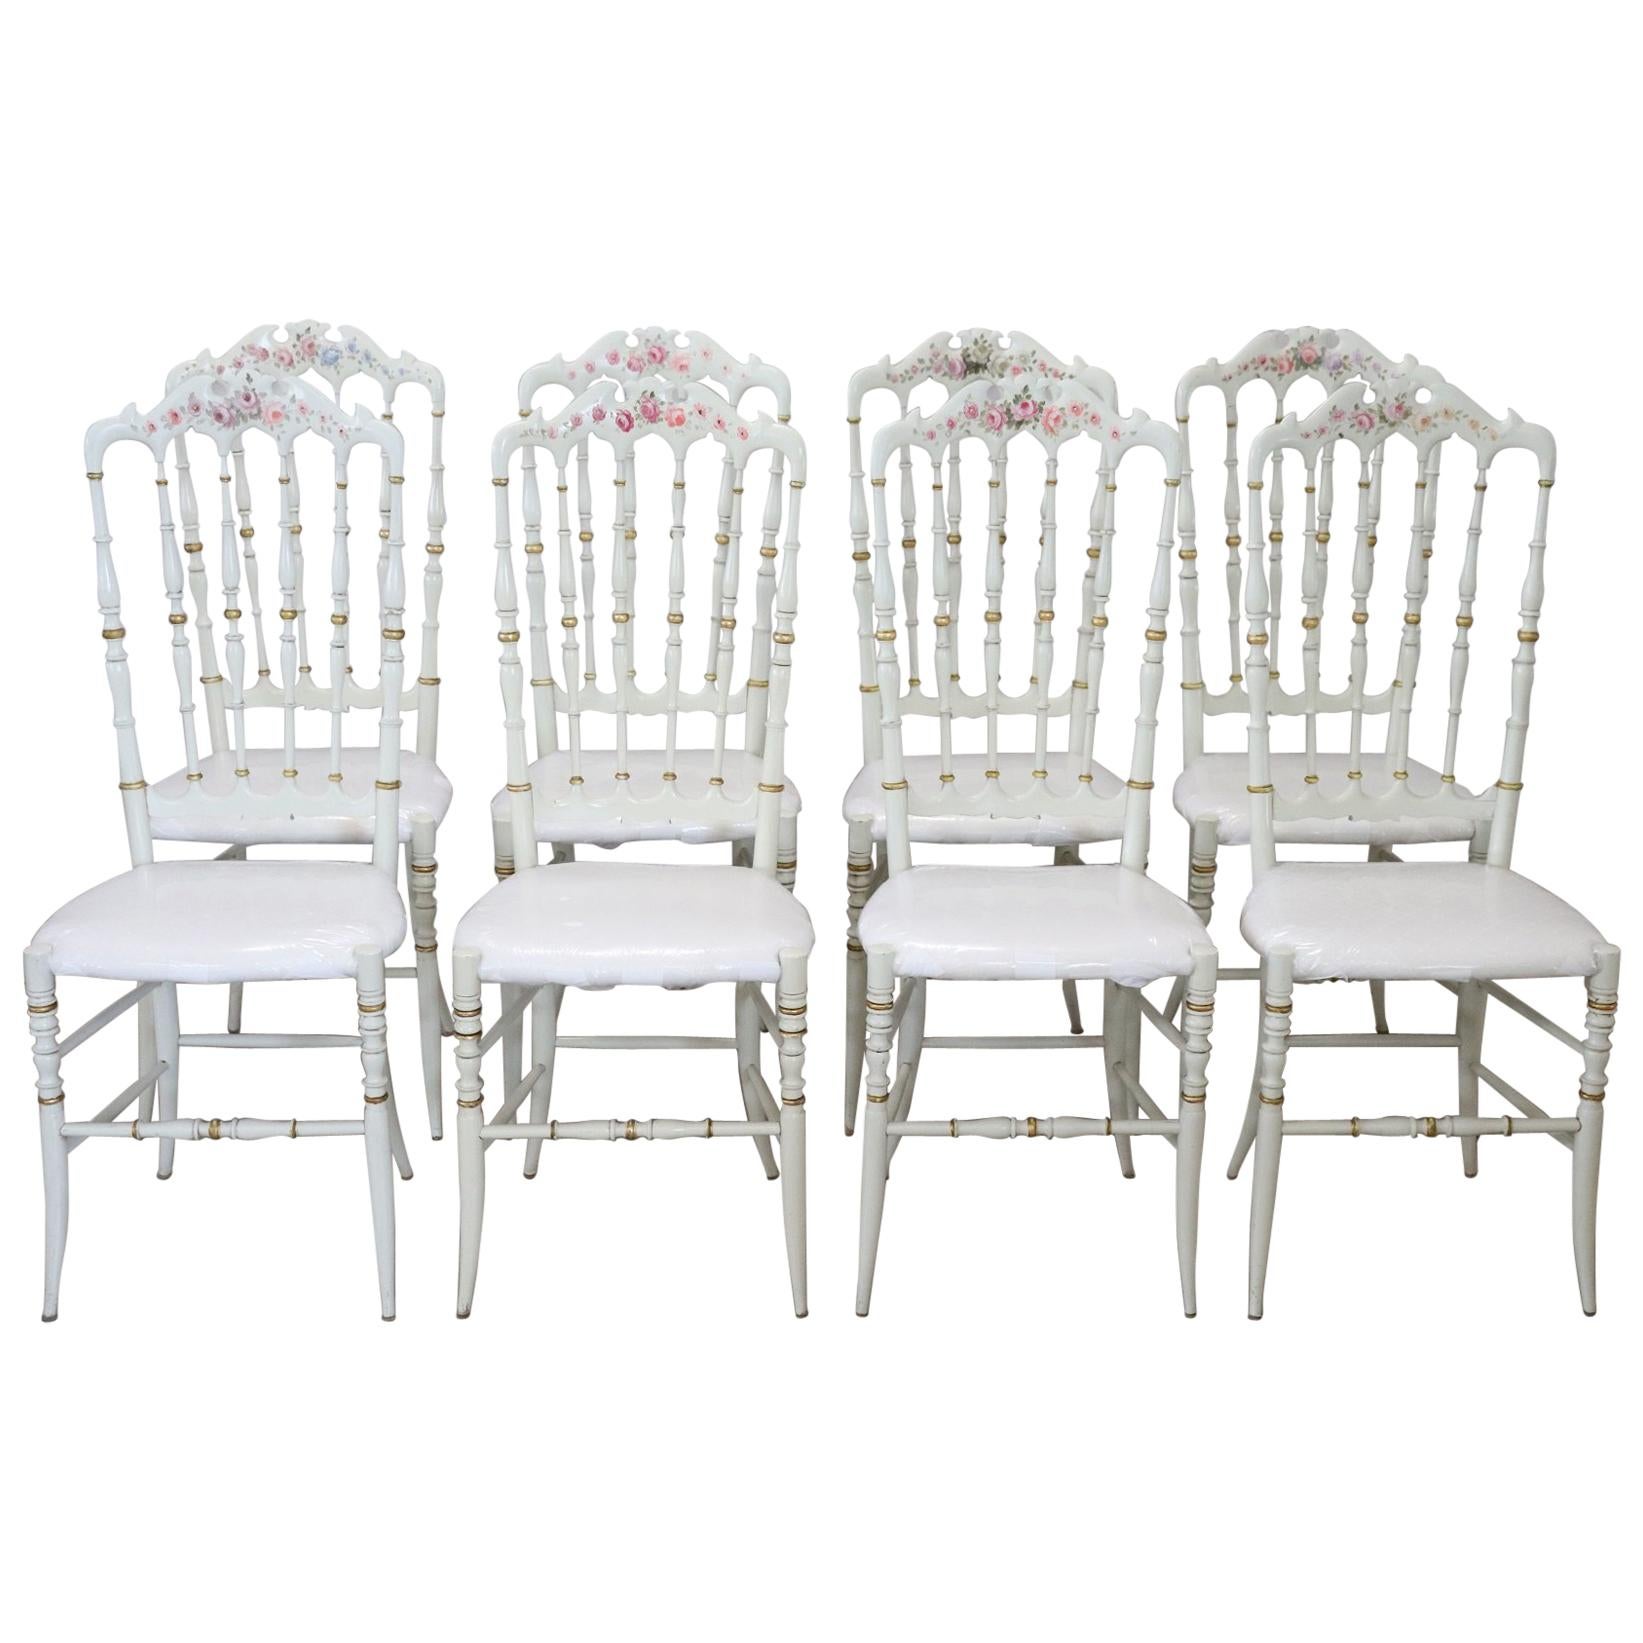 19th Century Italian Set of eight Turned and Lacquered Famous Chiavari Chairs